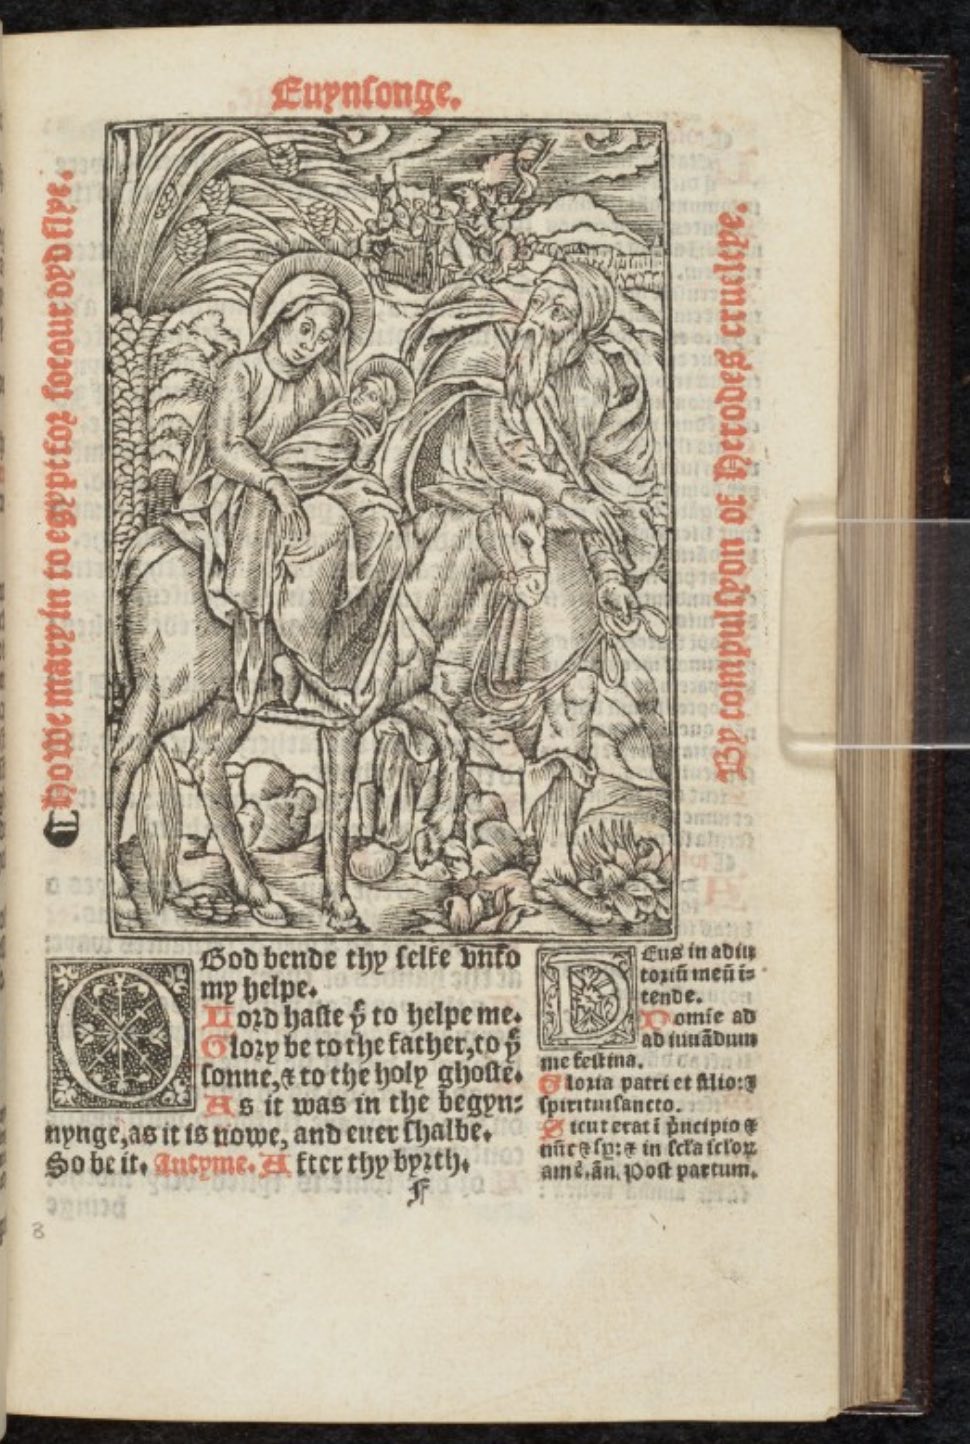 Basic devotional and liturgical texts [Latin/English]<br>Rouen, 1538